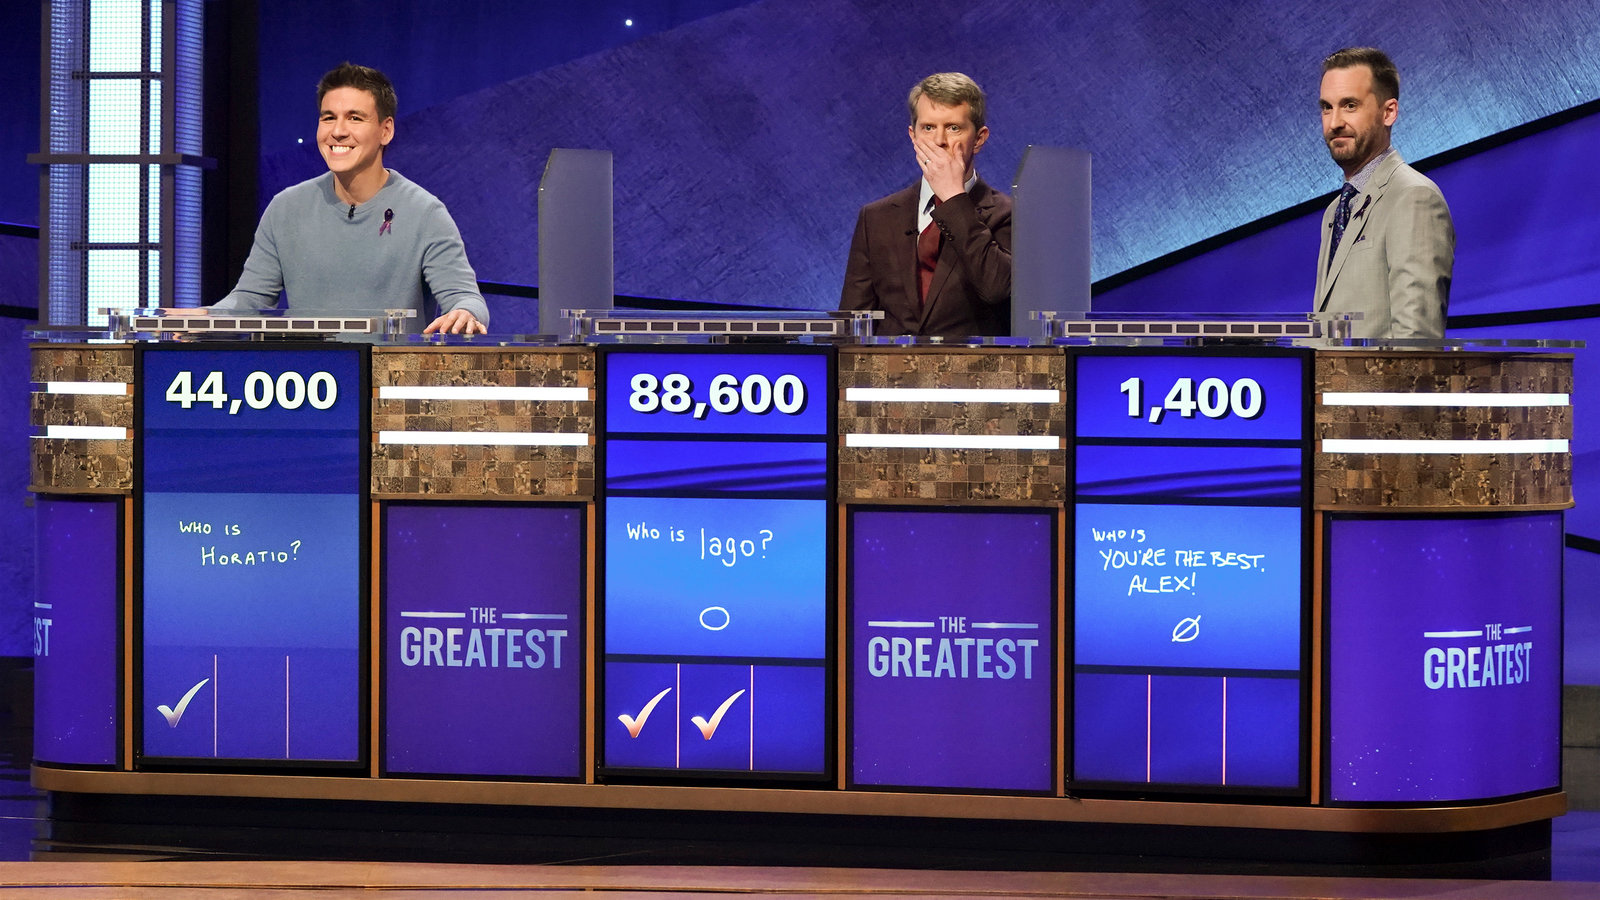 If You Get 11/15 on This Final Jeopardy Quiz, You’re a “Jeopardy!” Genius 14jeopardy Final1 Videosixteenbyninejumbo1600